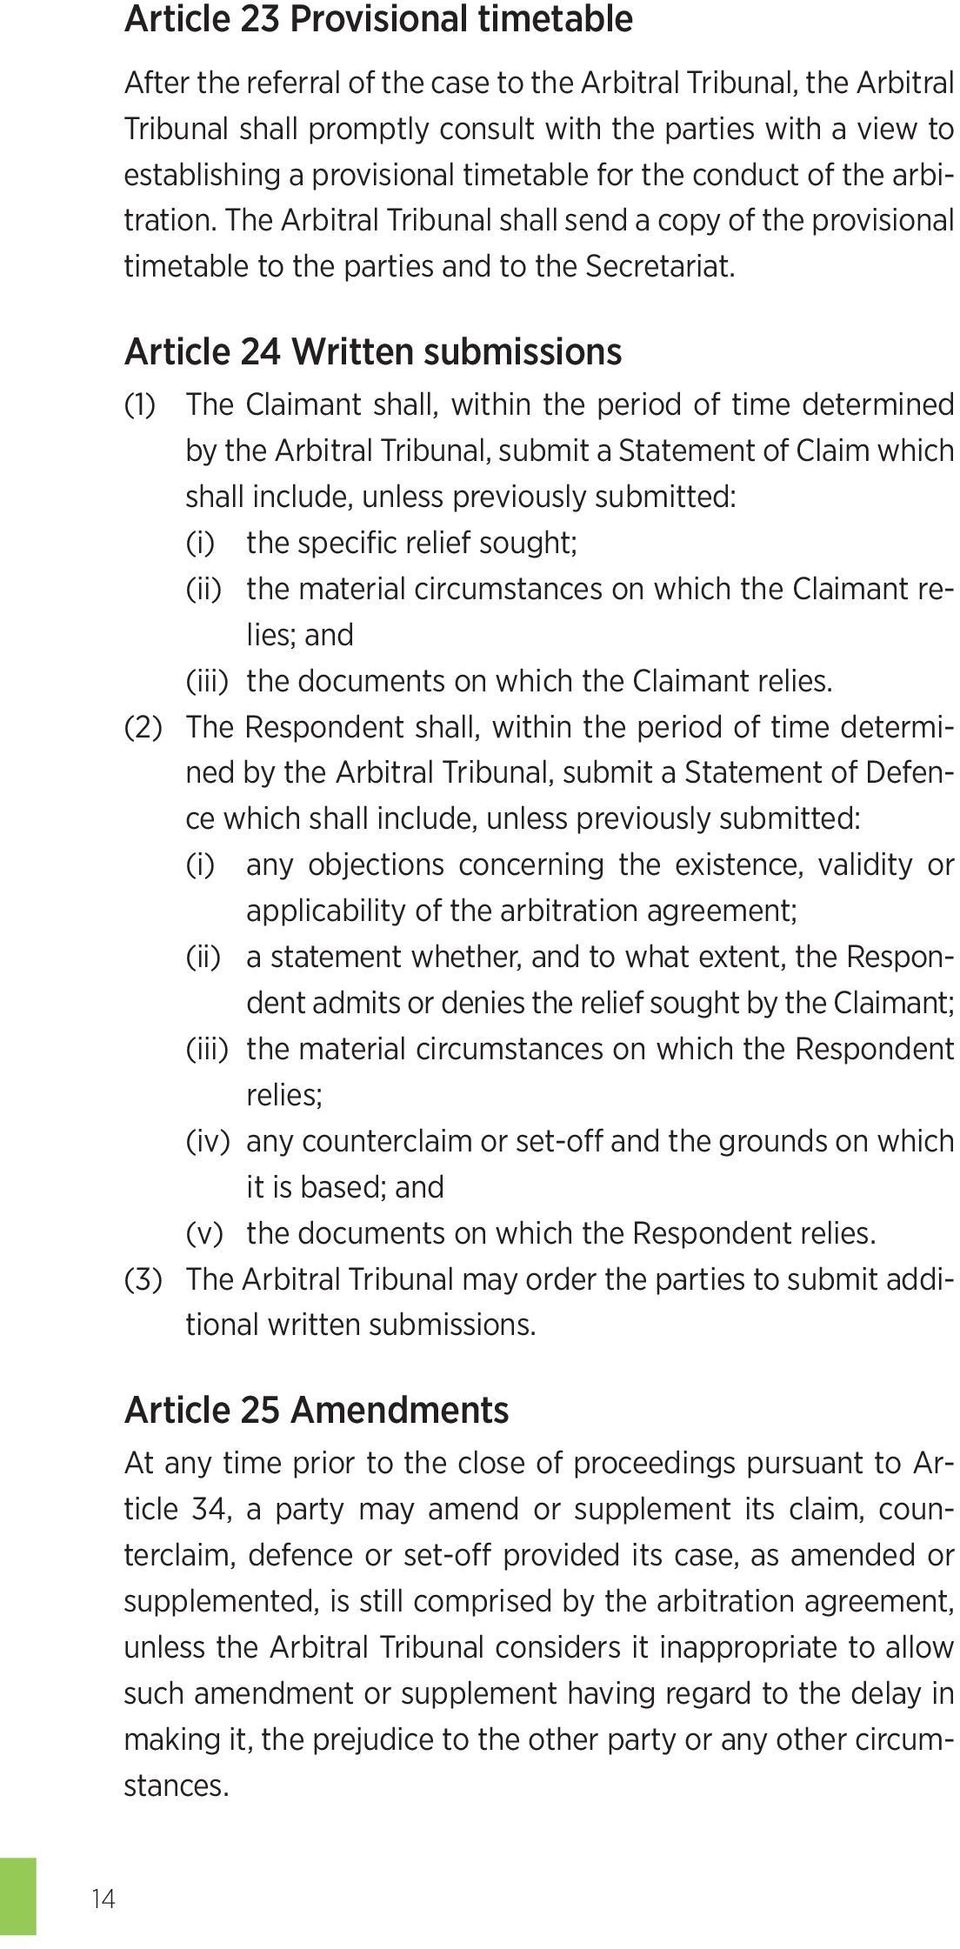 Article 24 Written submissions (1) The Claimant shall, within the period of time determined by the Arbitral Tribunal, submit a Statement of Claim which shall include, unless previously submitted: (i)